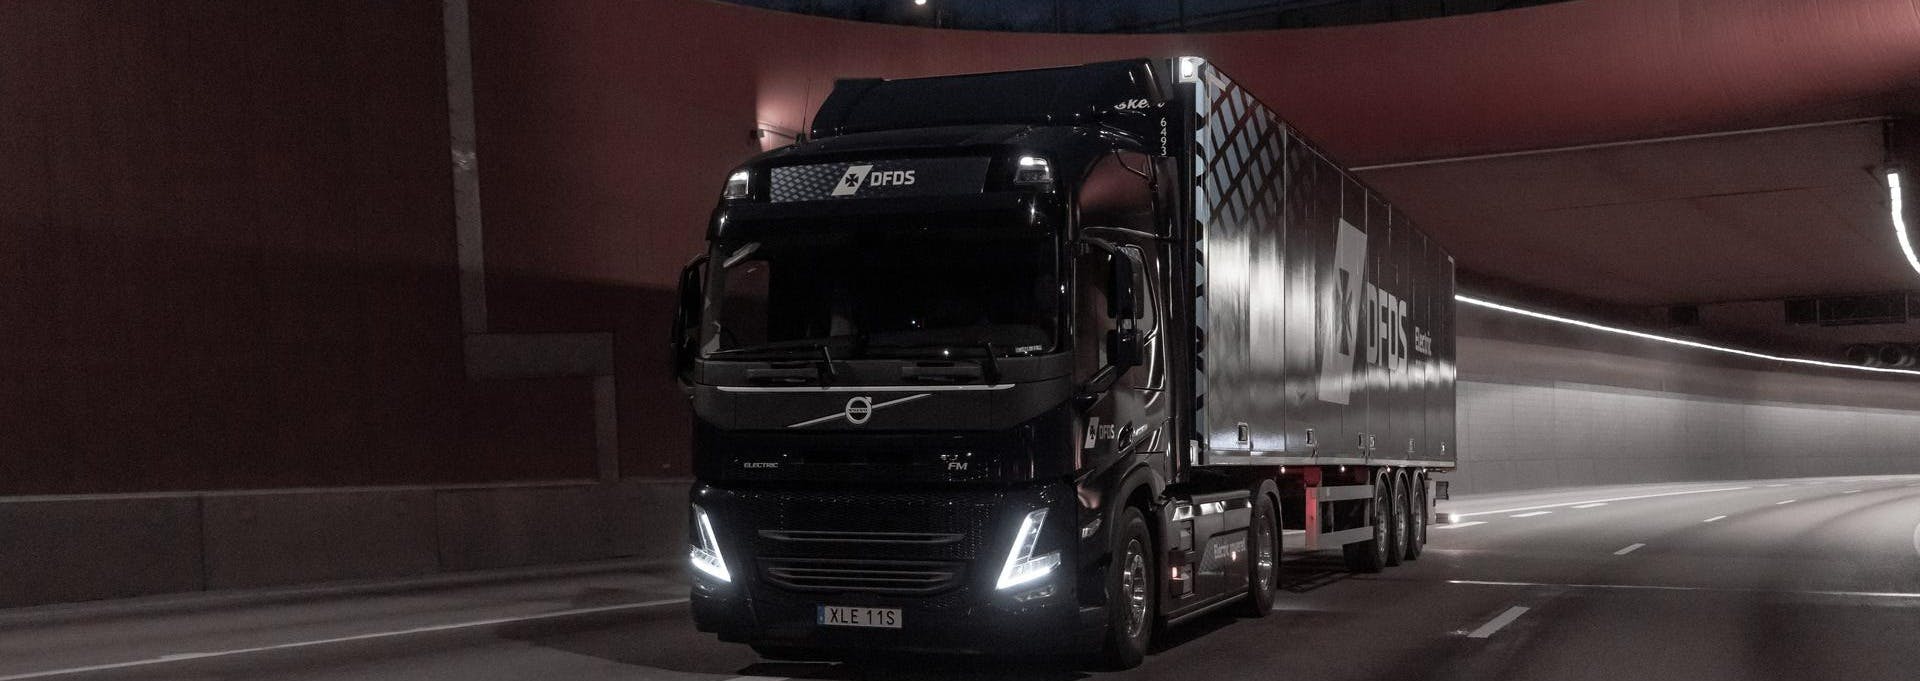 DFDS Electric truck, driving at night